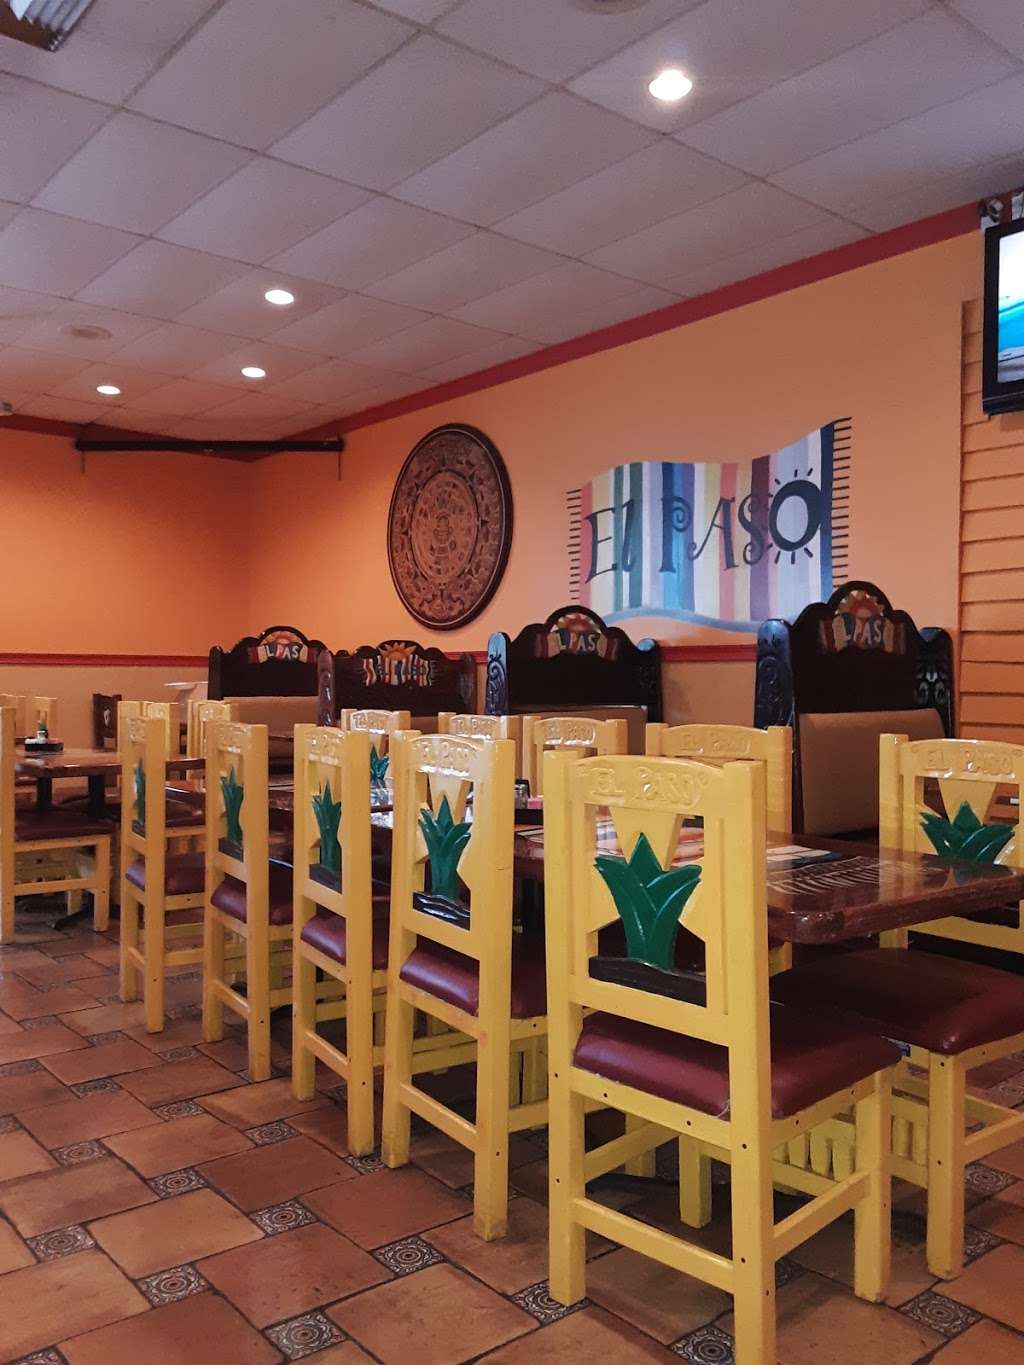 El Paso Mexican Restaurant | 1709 N Center St, Hickory, NC 28601 | Phone: (828) 322-6292